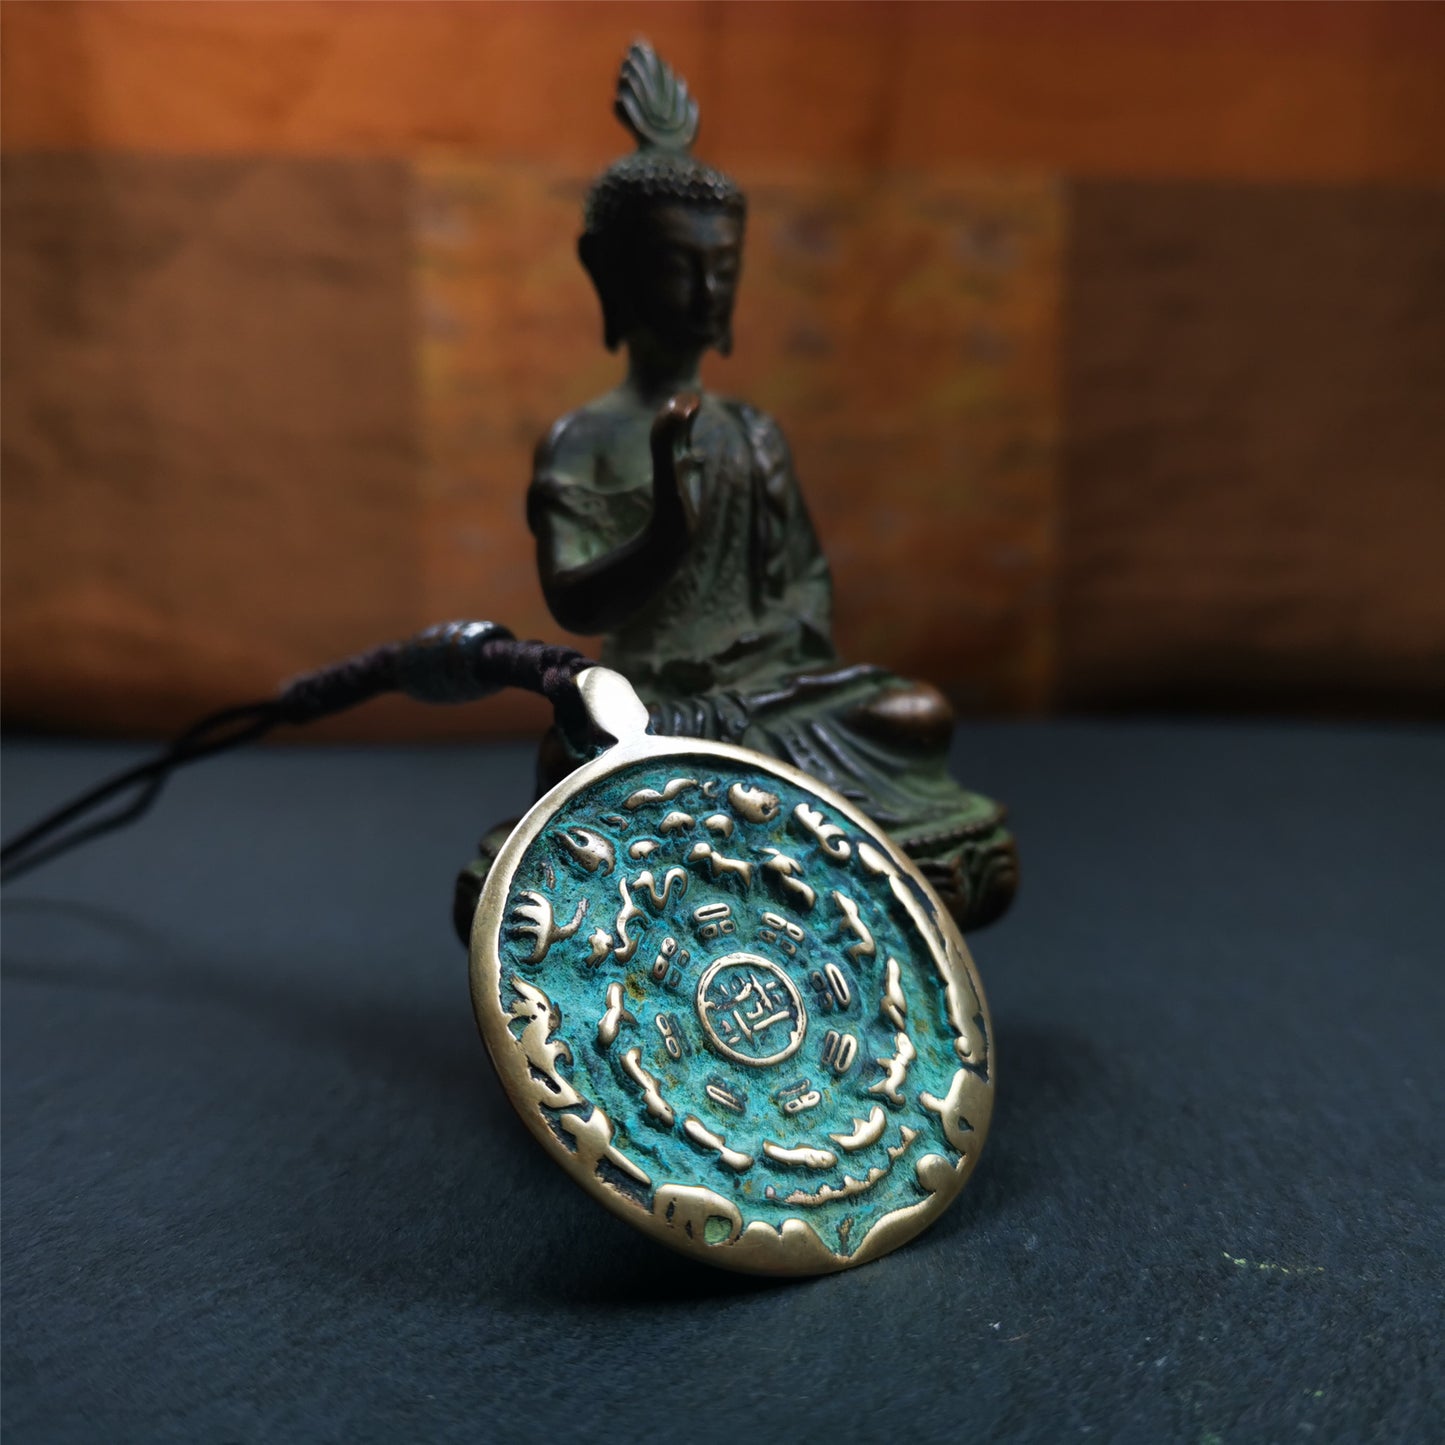 This unique tibetan melong badge was collected from Kathok Monastery,about 50 years old. It's a Astrology Protective Amulet Pendant,made of lima brass. The pattern is Tibetan Budhist Protective Amulet Pendant - SIPAHO(srid pa ho).